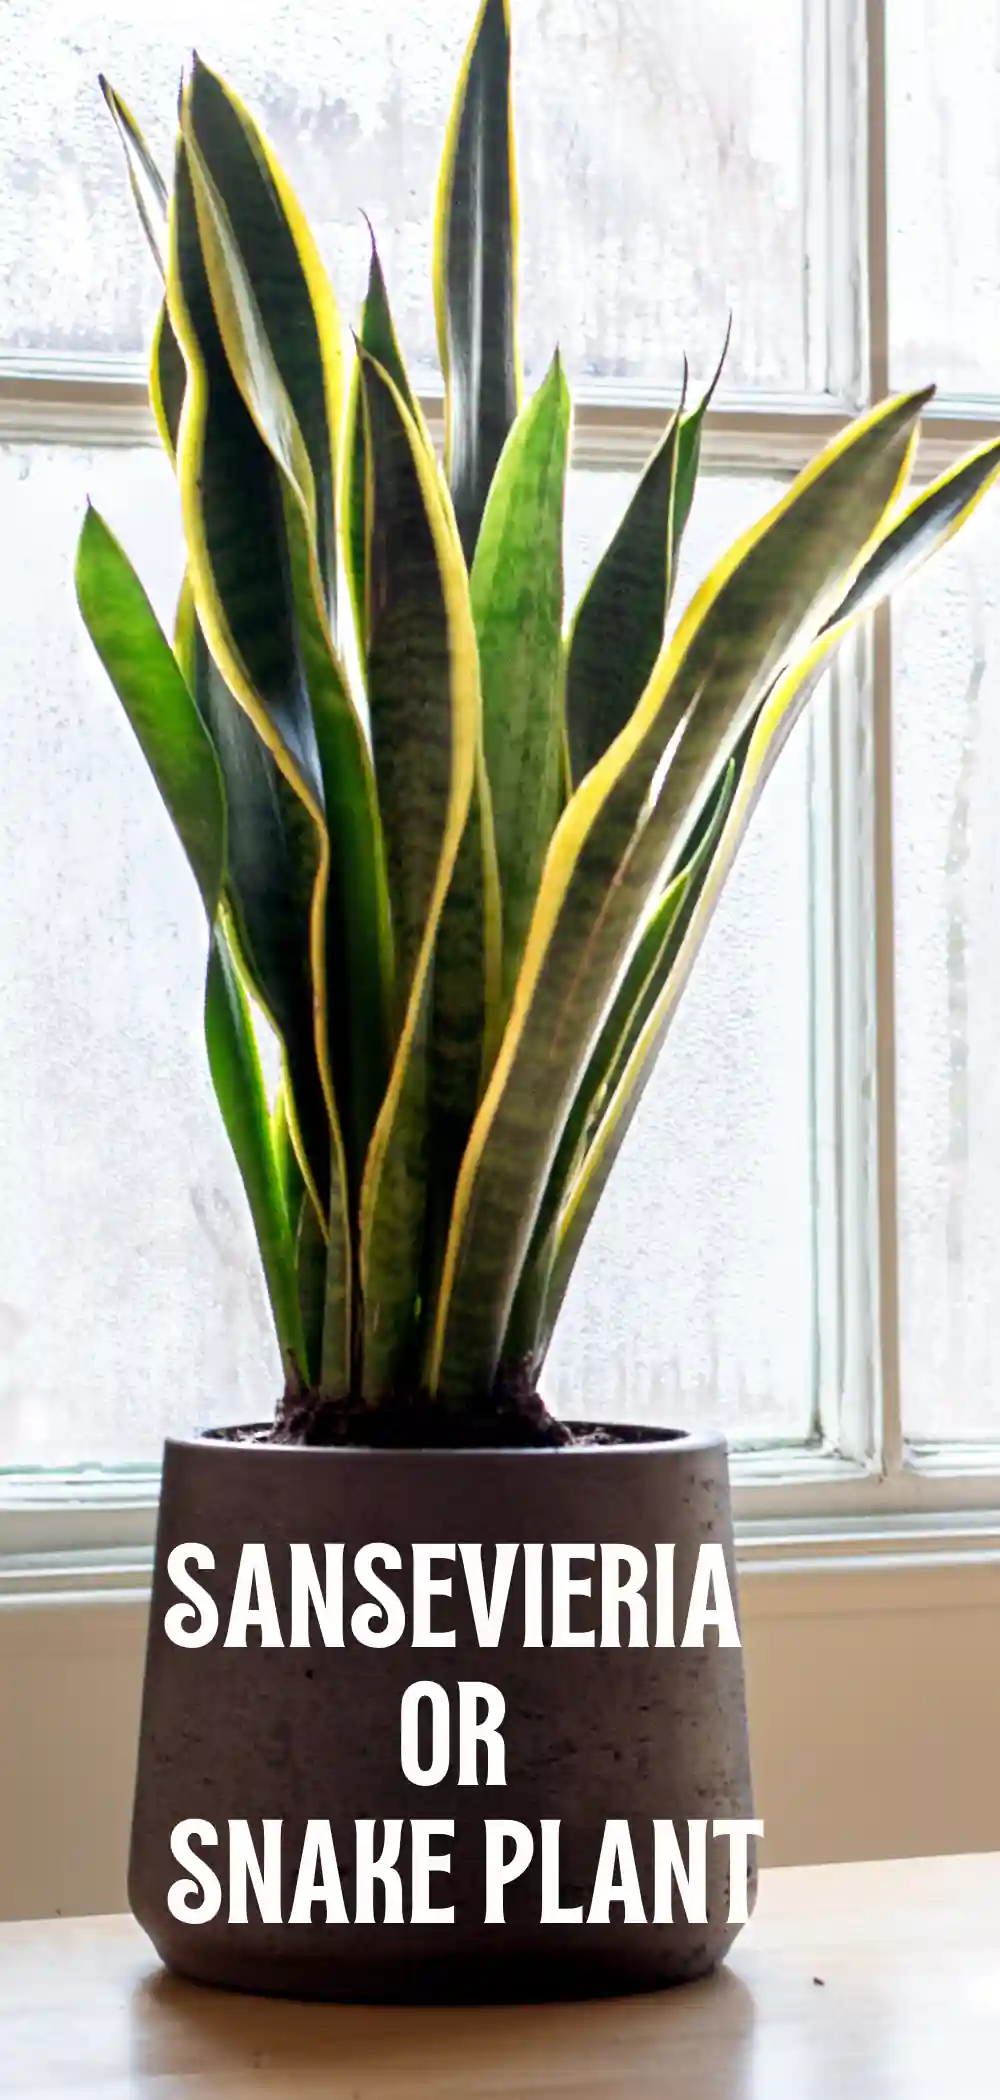 Image of Sansevieria also known as Snake Plant